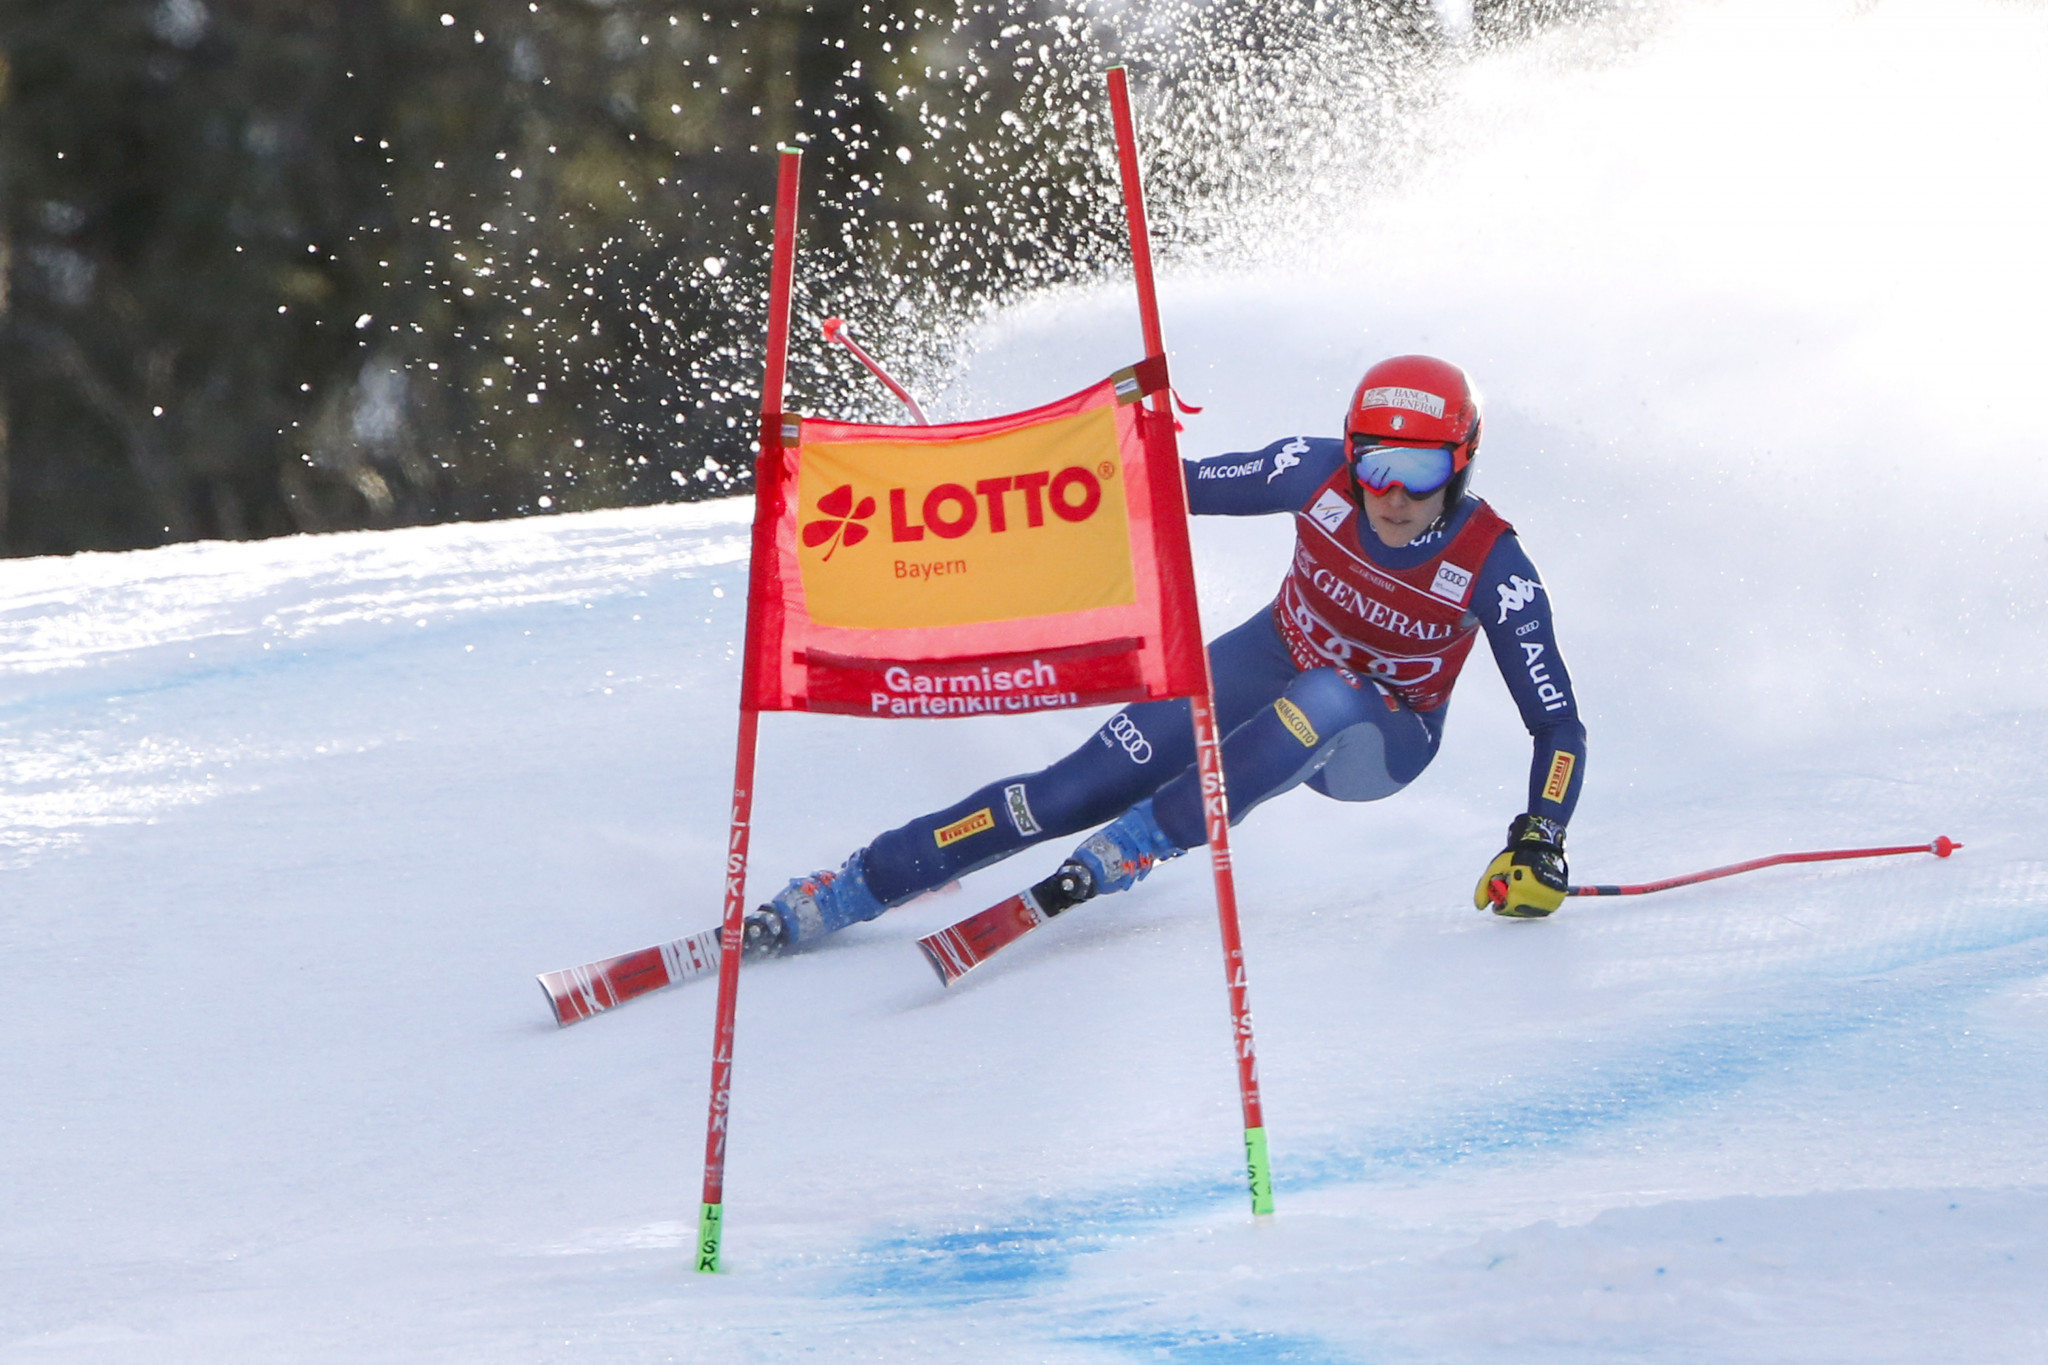 Federica Brignone of Italy slipped down to second in the Super-G seconds after a fifth place finish in Garmisch-Partenkirchen ©Getty Images